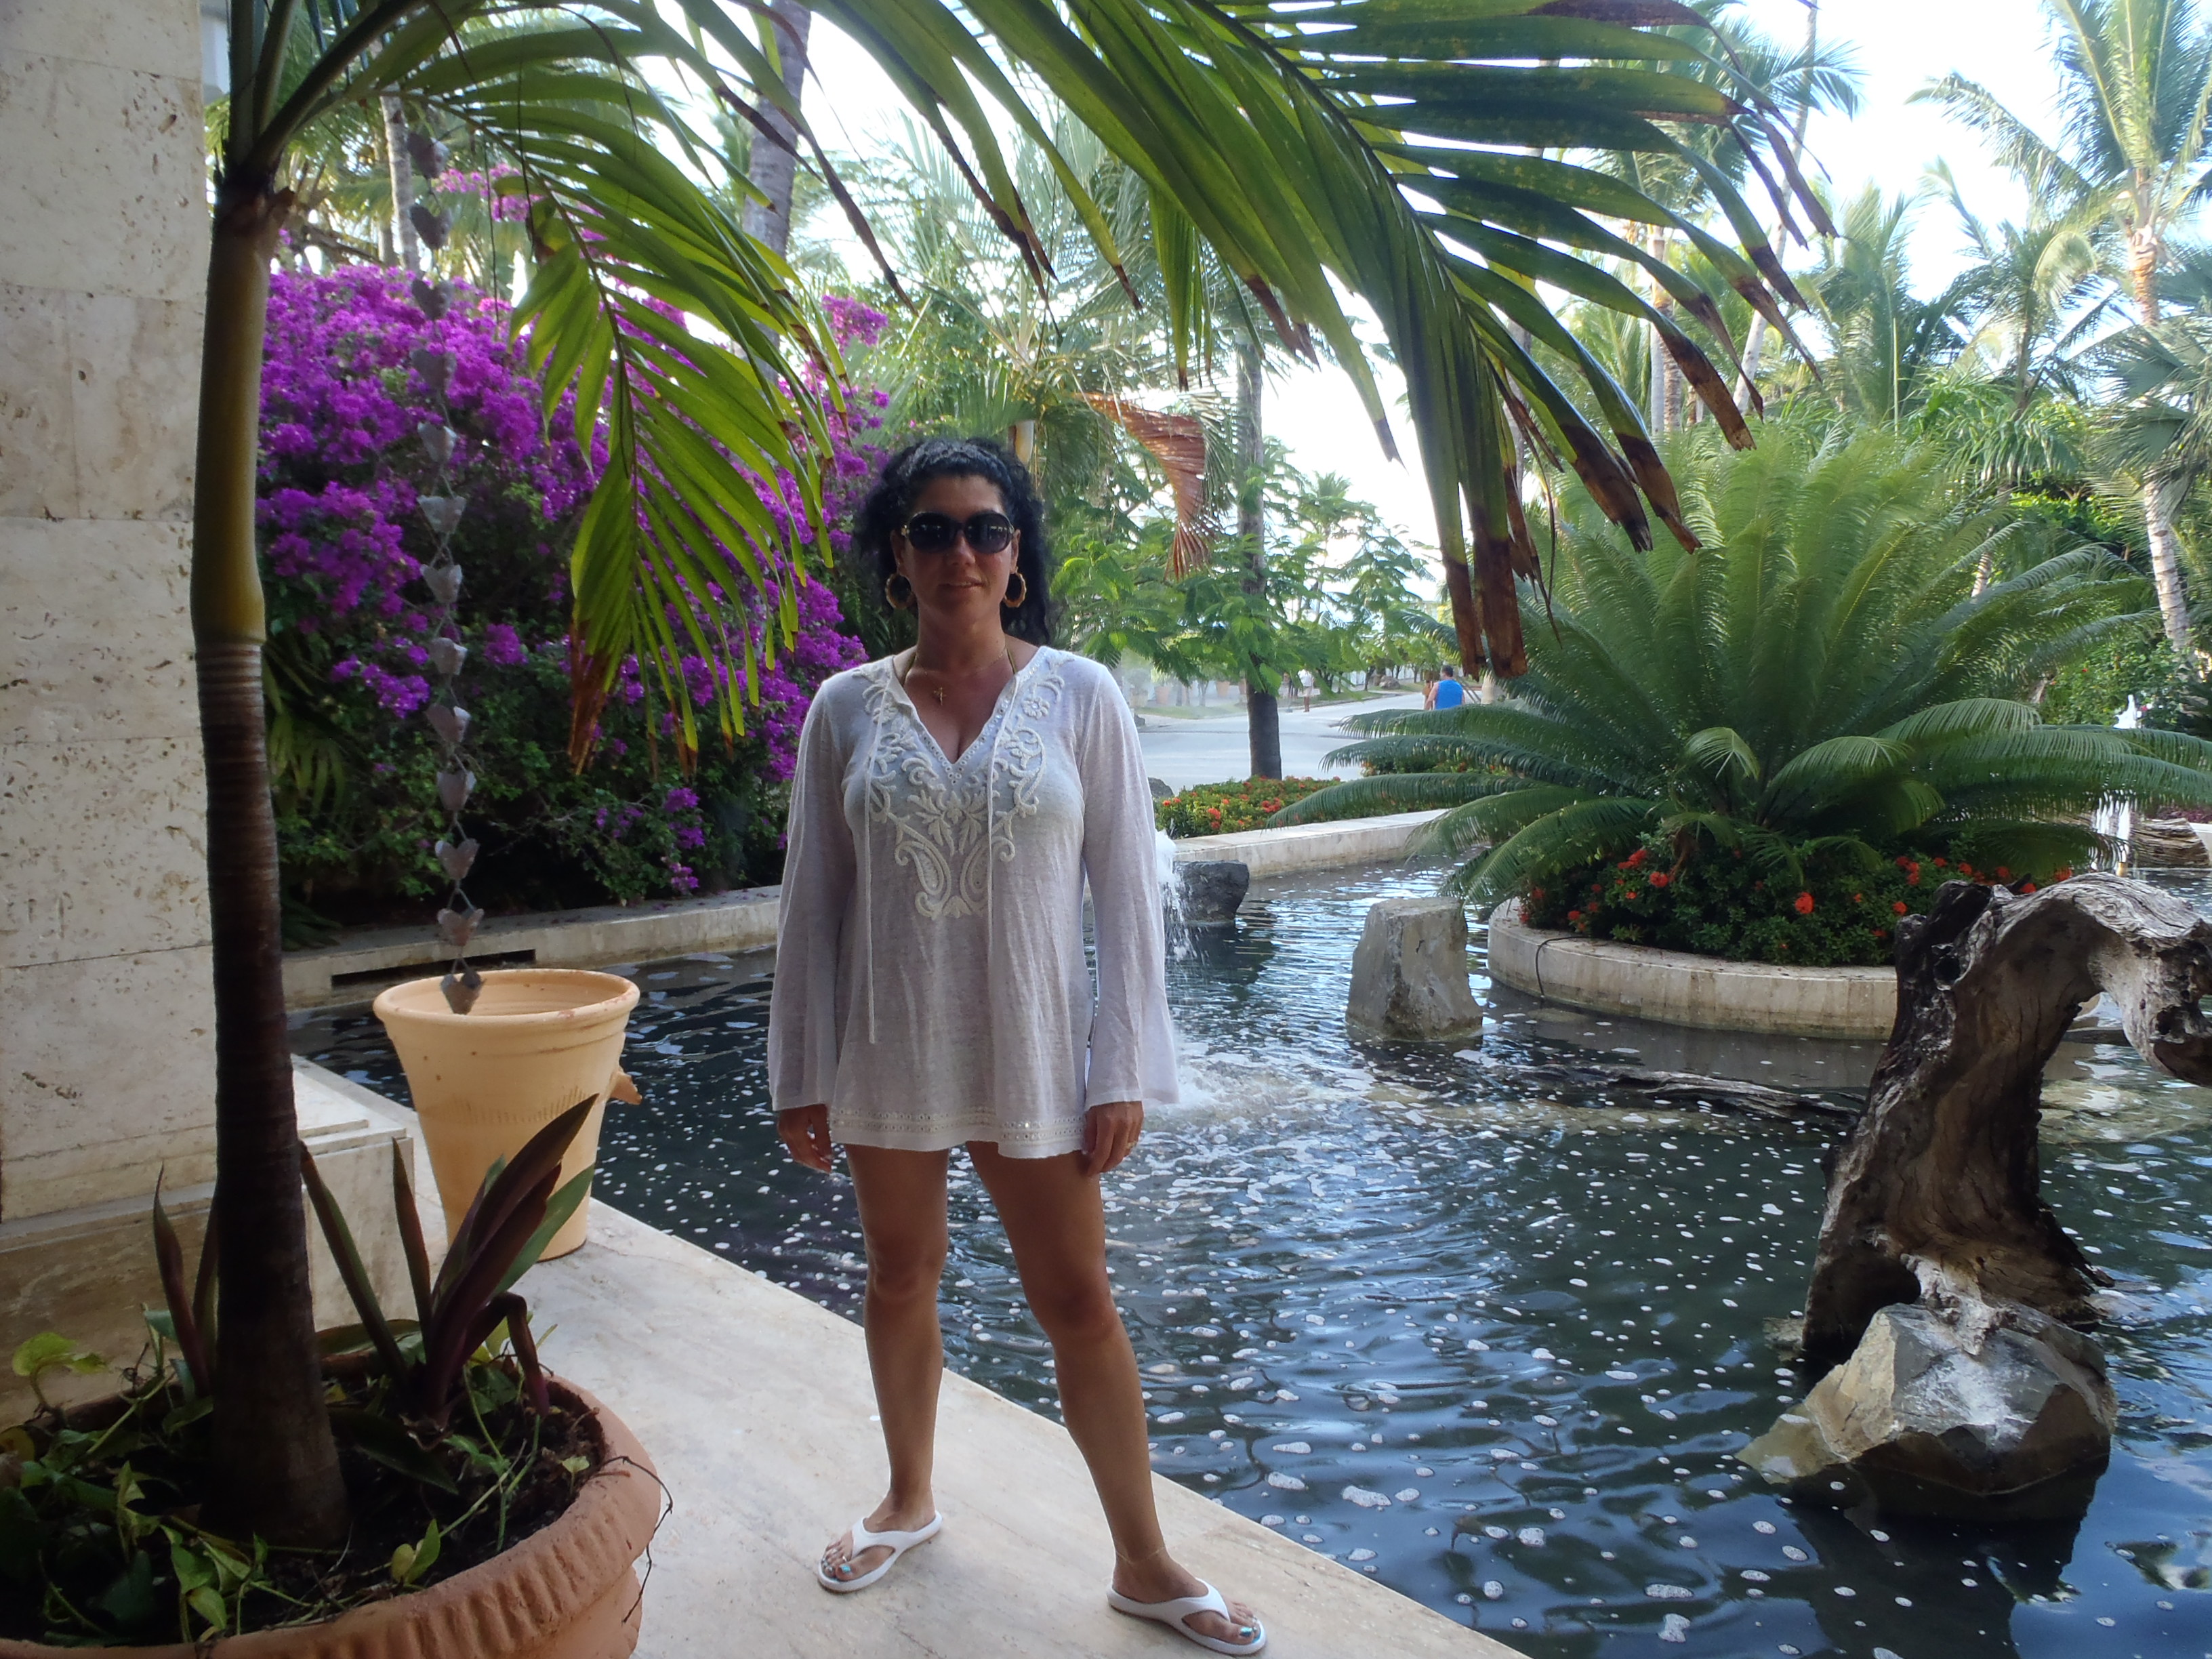 Photo in March 2014, Punta Cana, DR